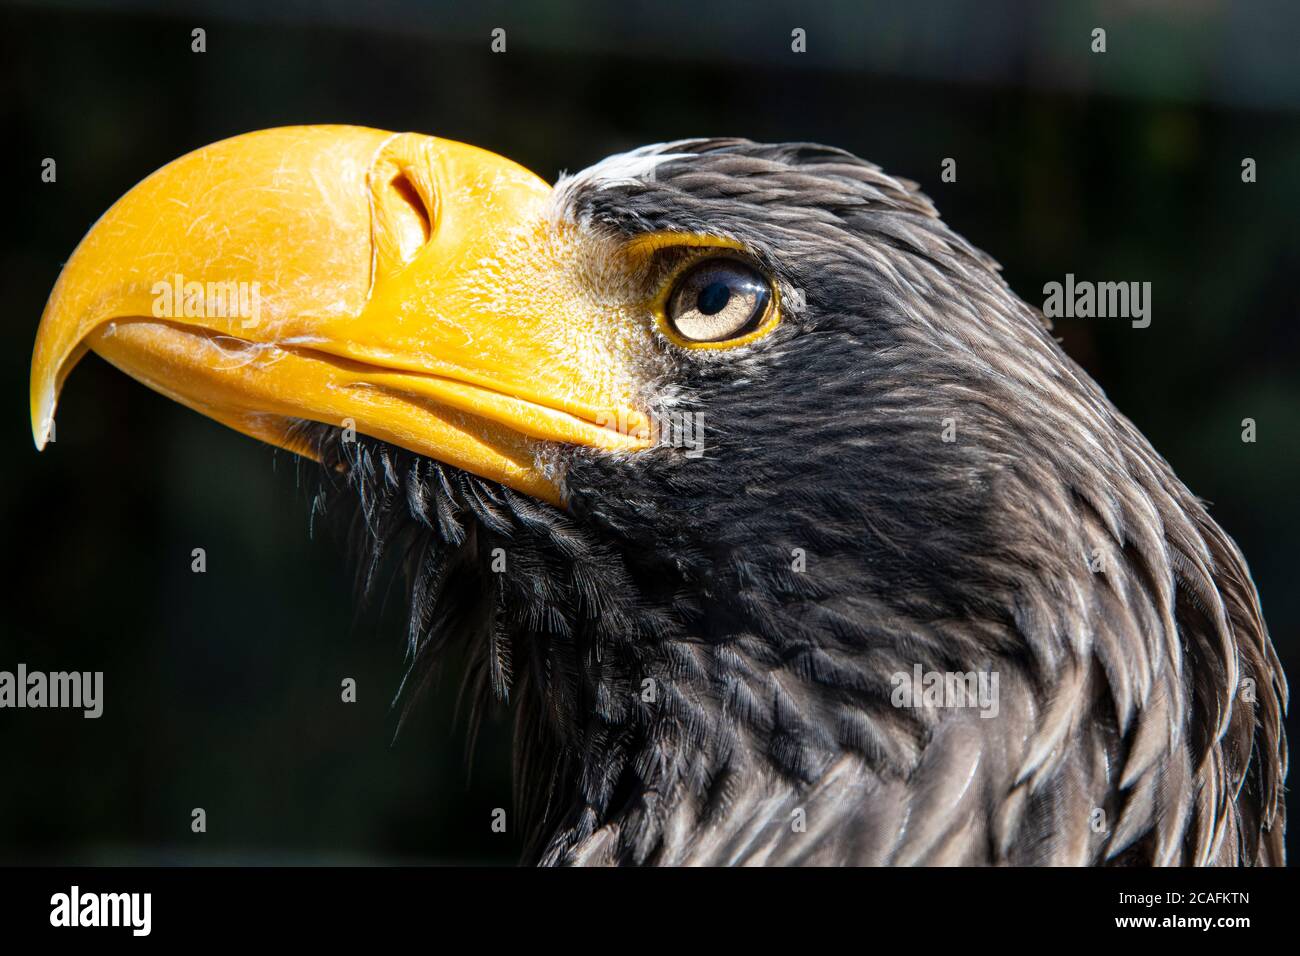 Side view in close up of an eagle with a yellow beak and dark feathers Stock Photo